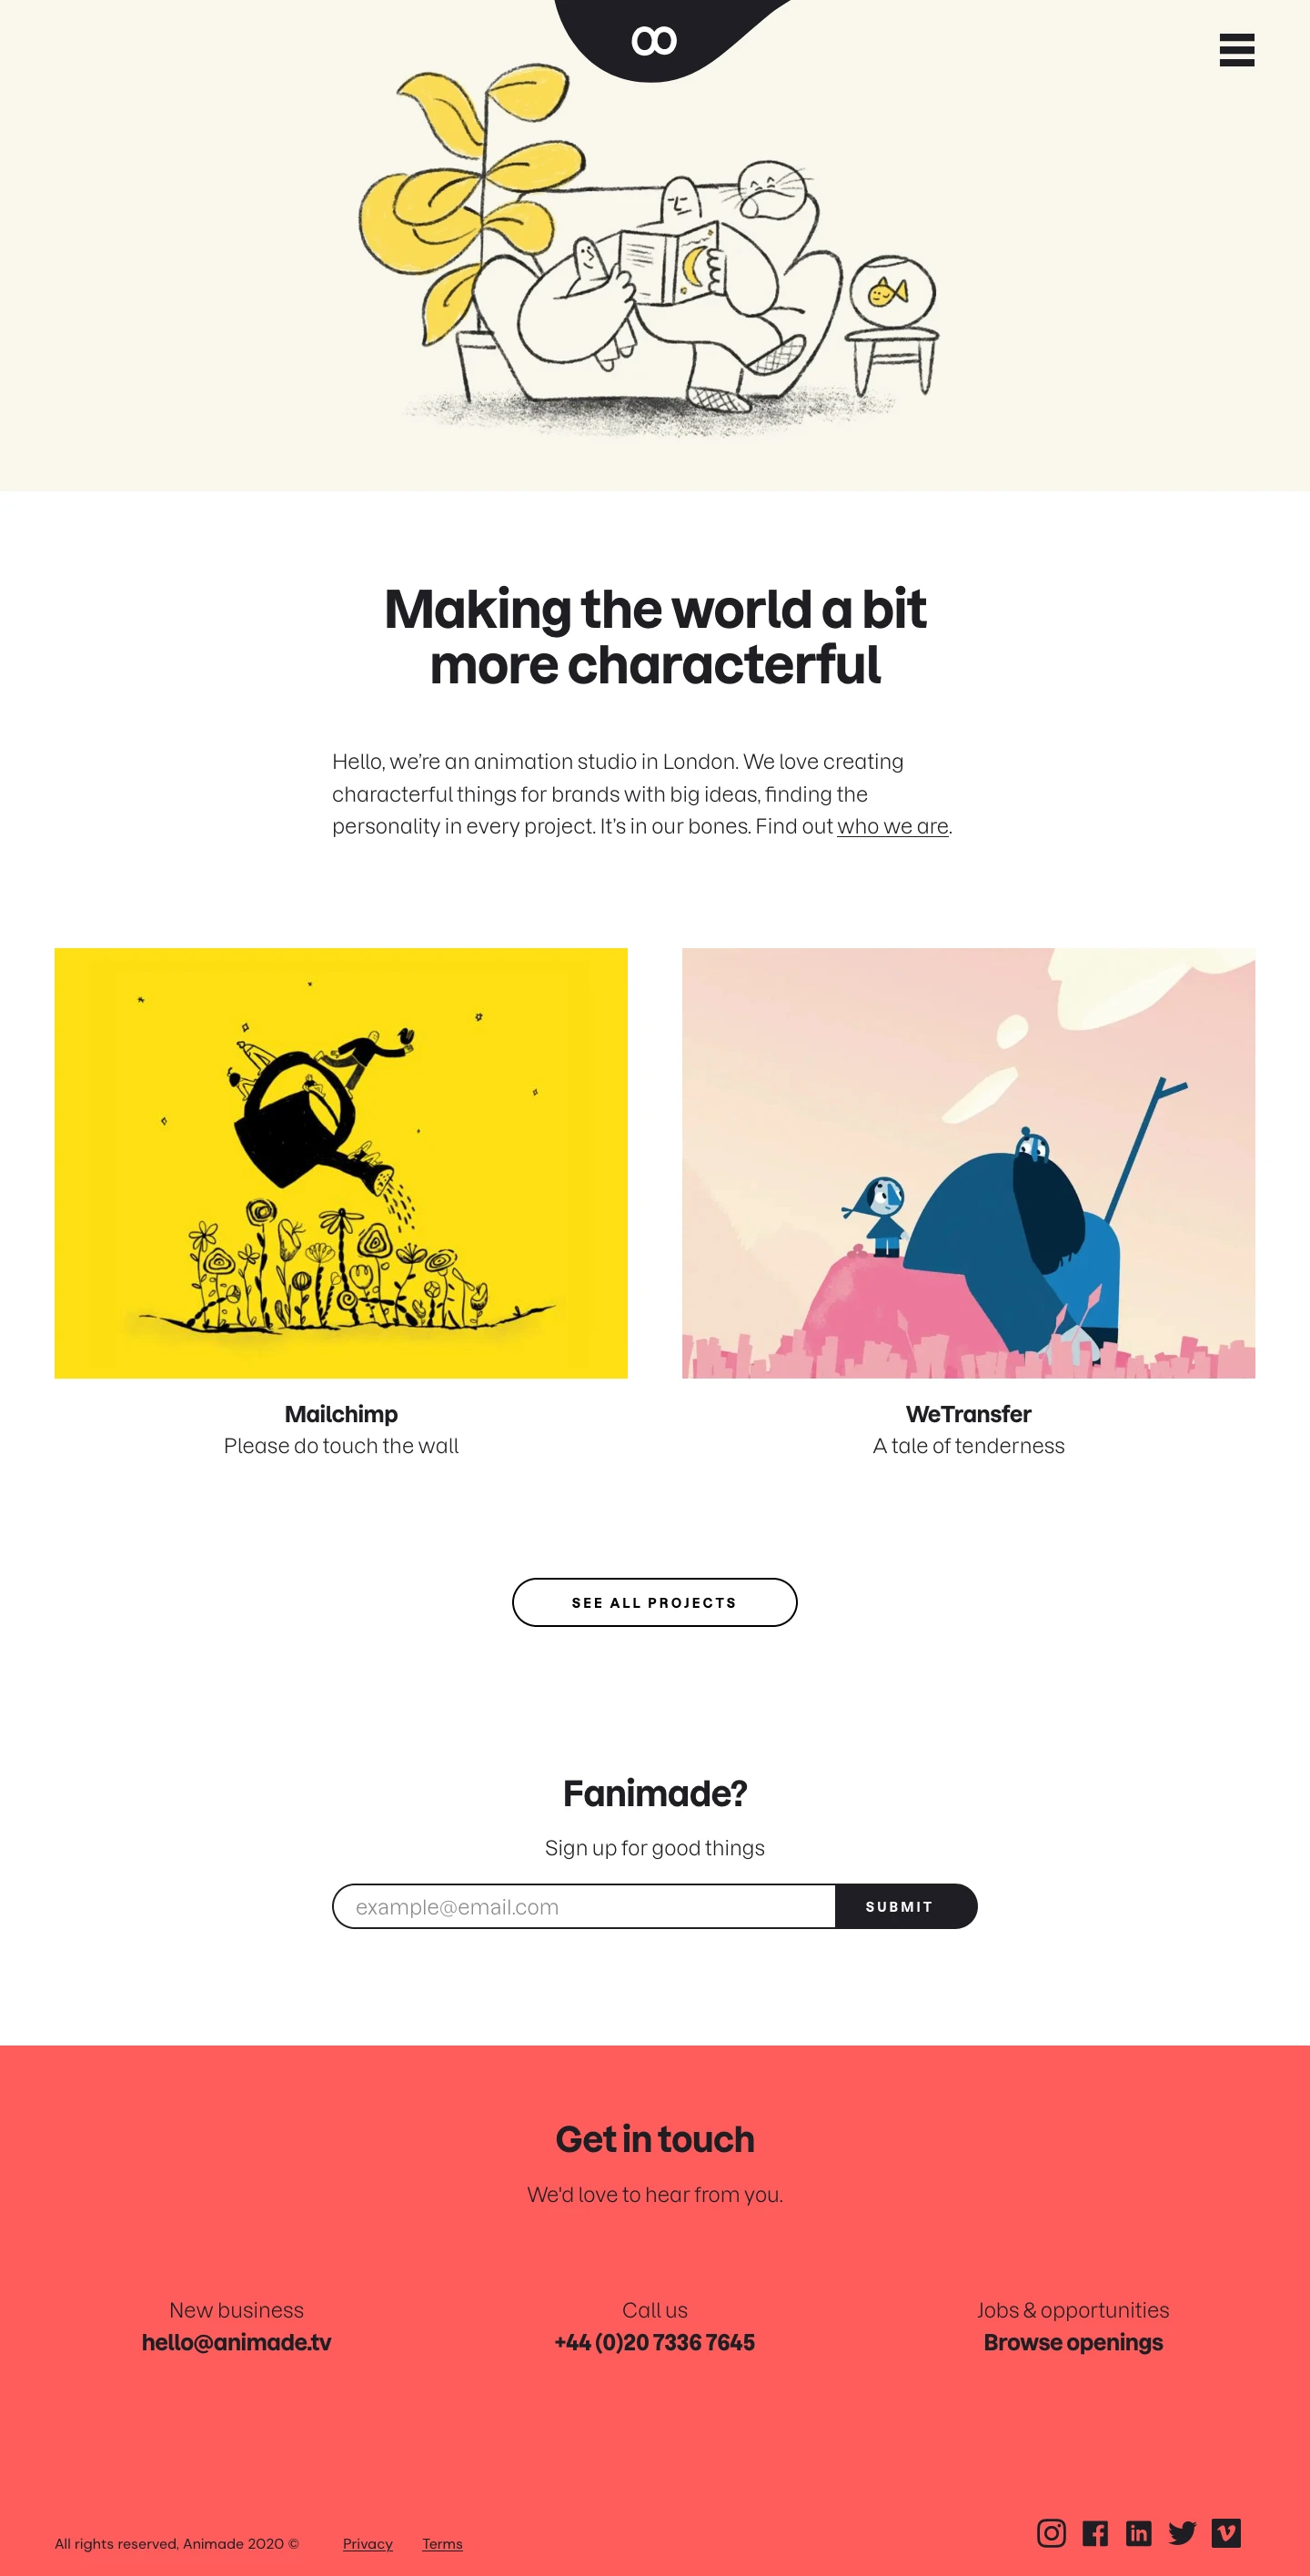 Animade Landing Page Example: Hello, we’re an animation studio in London. We love creating characterful things for brands with big ideas, finding the personality in every project. It’s in our bones. 